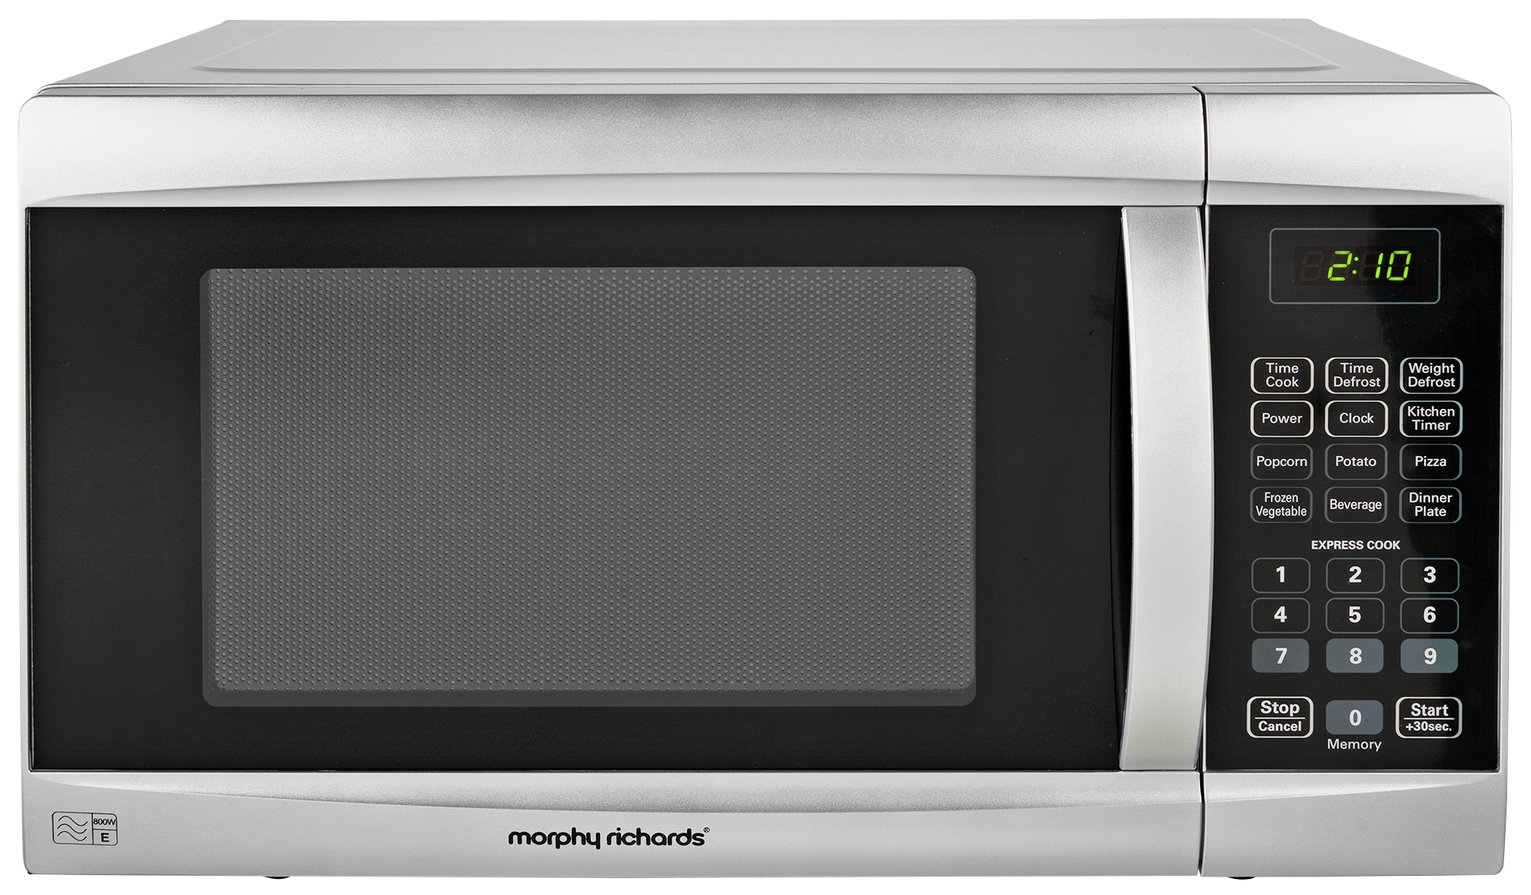 Morphy Richards - Touch Microwave - EM823AGS 800W -Silver Review